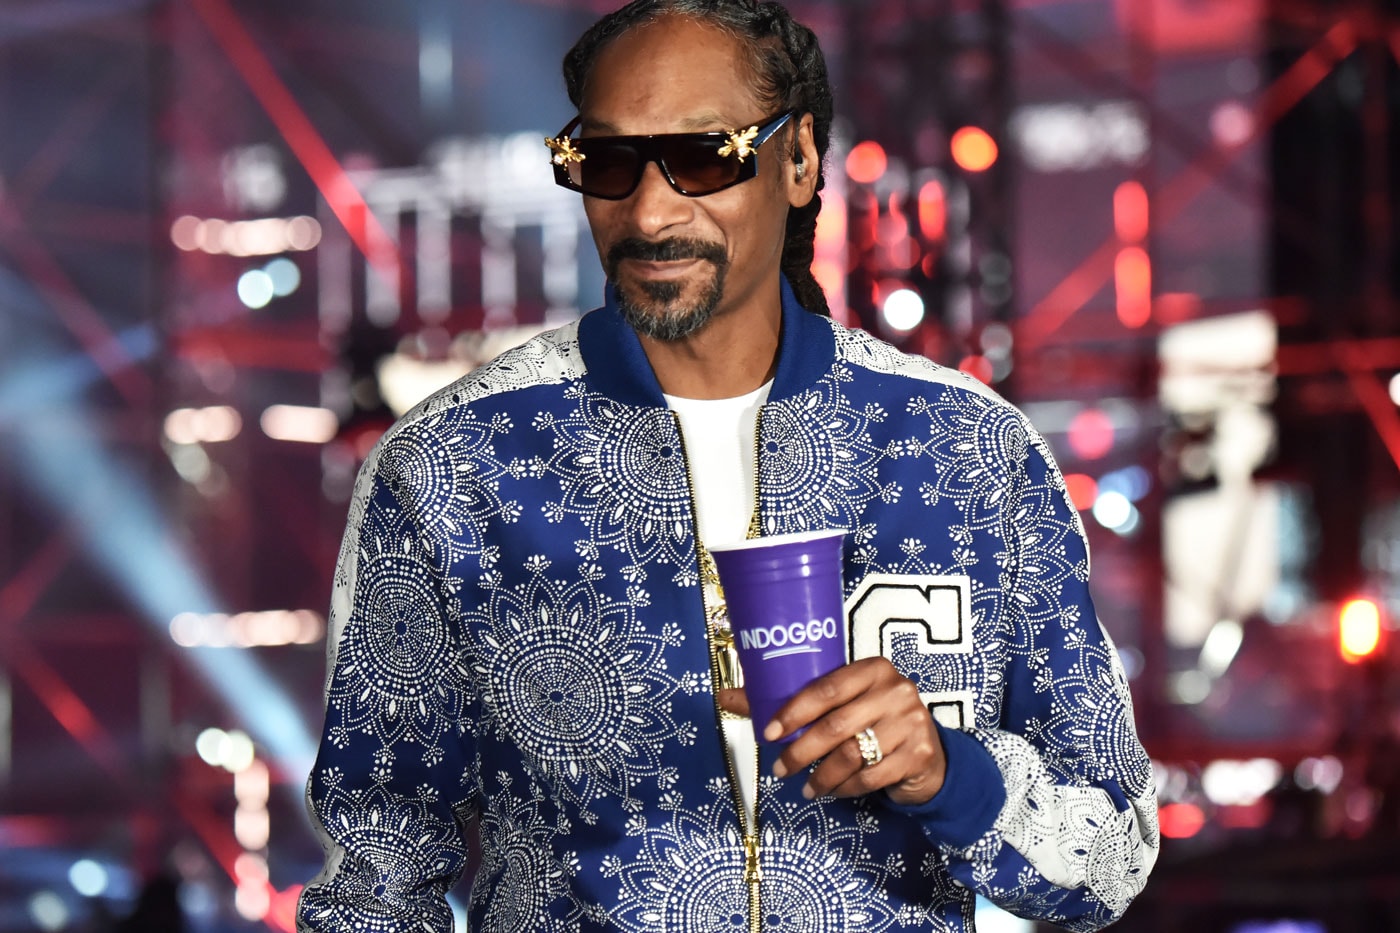 Da Game Is To Be Sold, Not To Be Told': Snoop Dogg's No Limit Debut